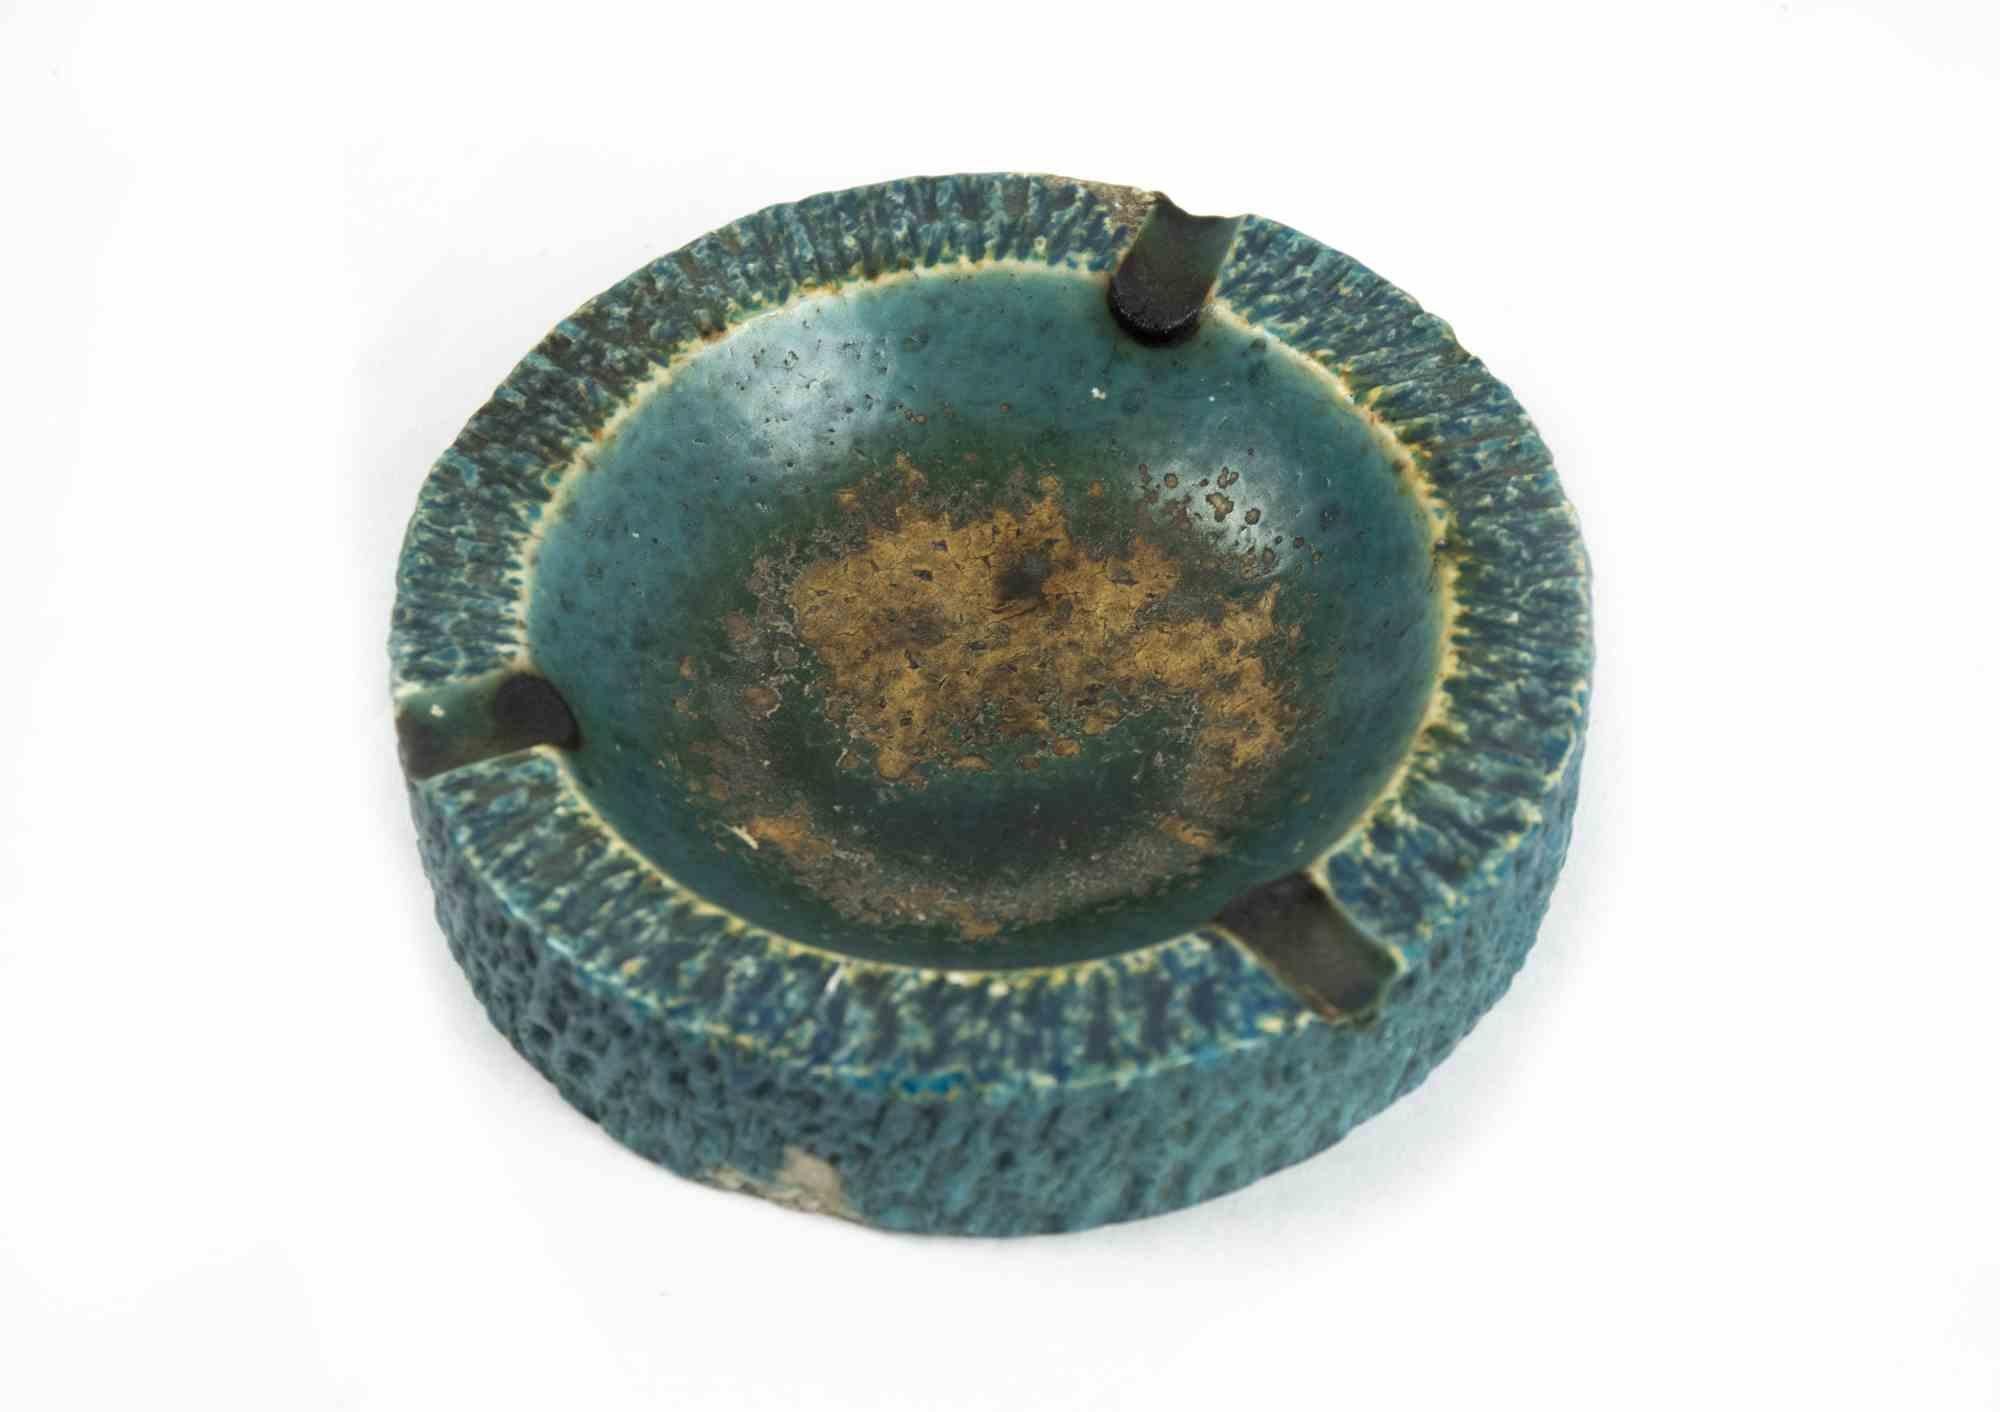 Vintage turquoise ashtray is an original decorative object realized in the 1970s.

A vintage hand made ceramic ashtray turquoise colored. 

Mint conditions (lack of colors and signs due to the time).

Perfect to decor your desk.